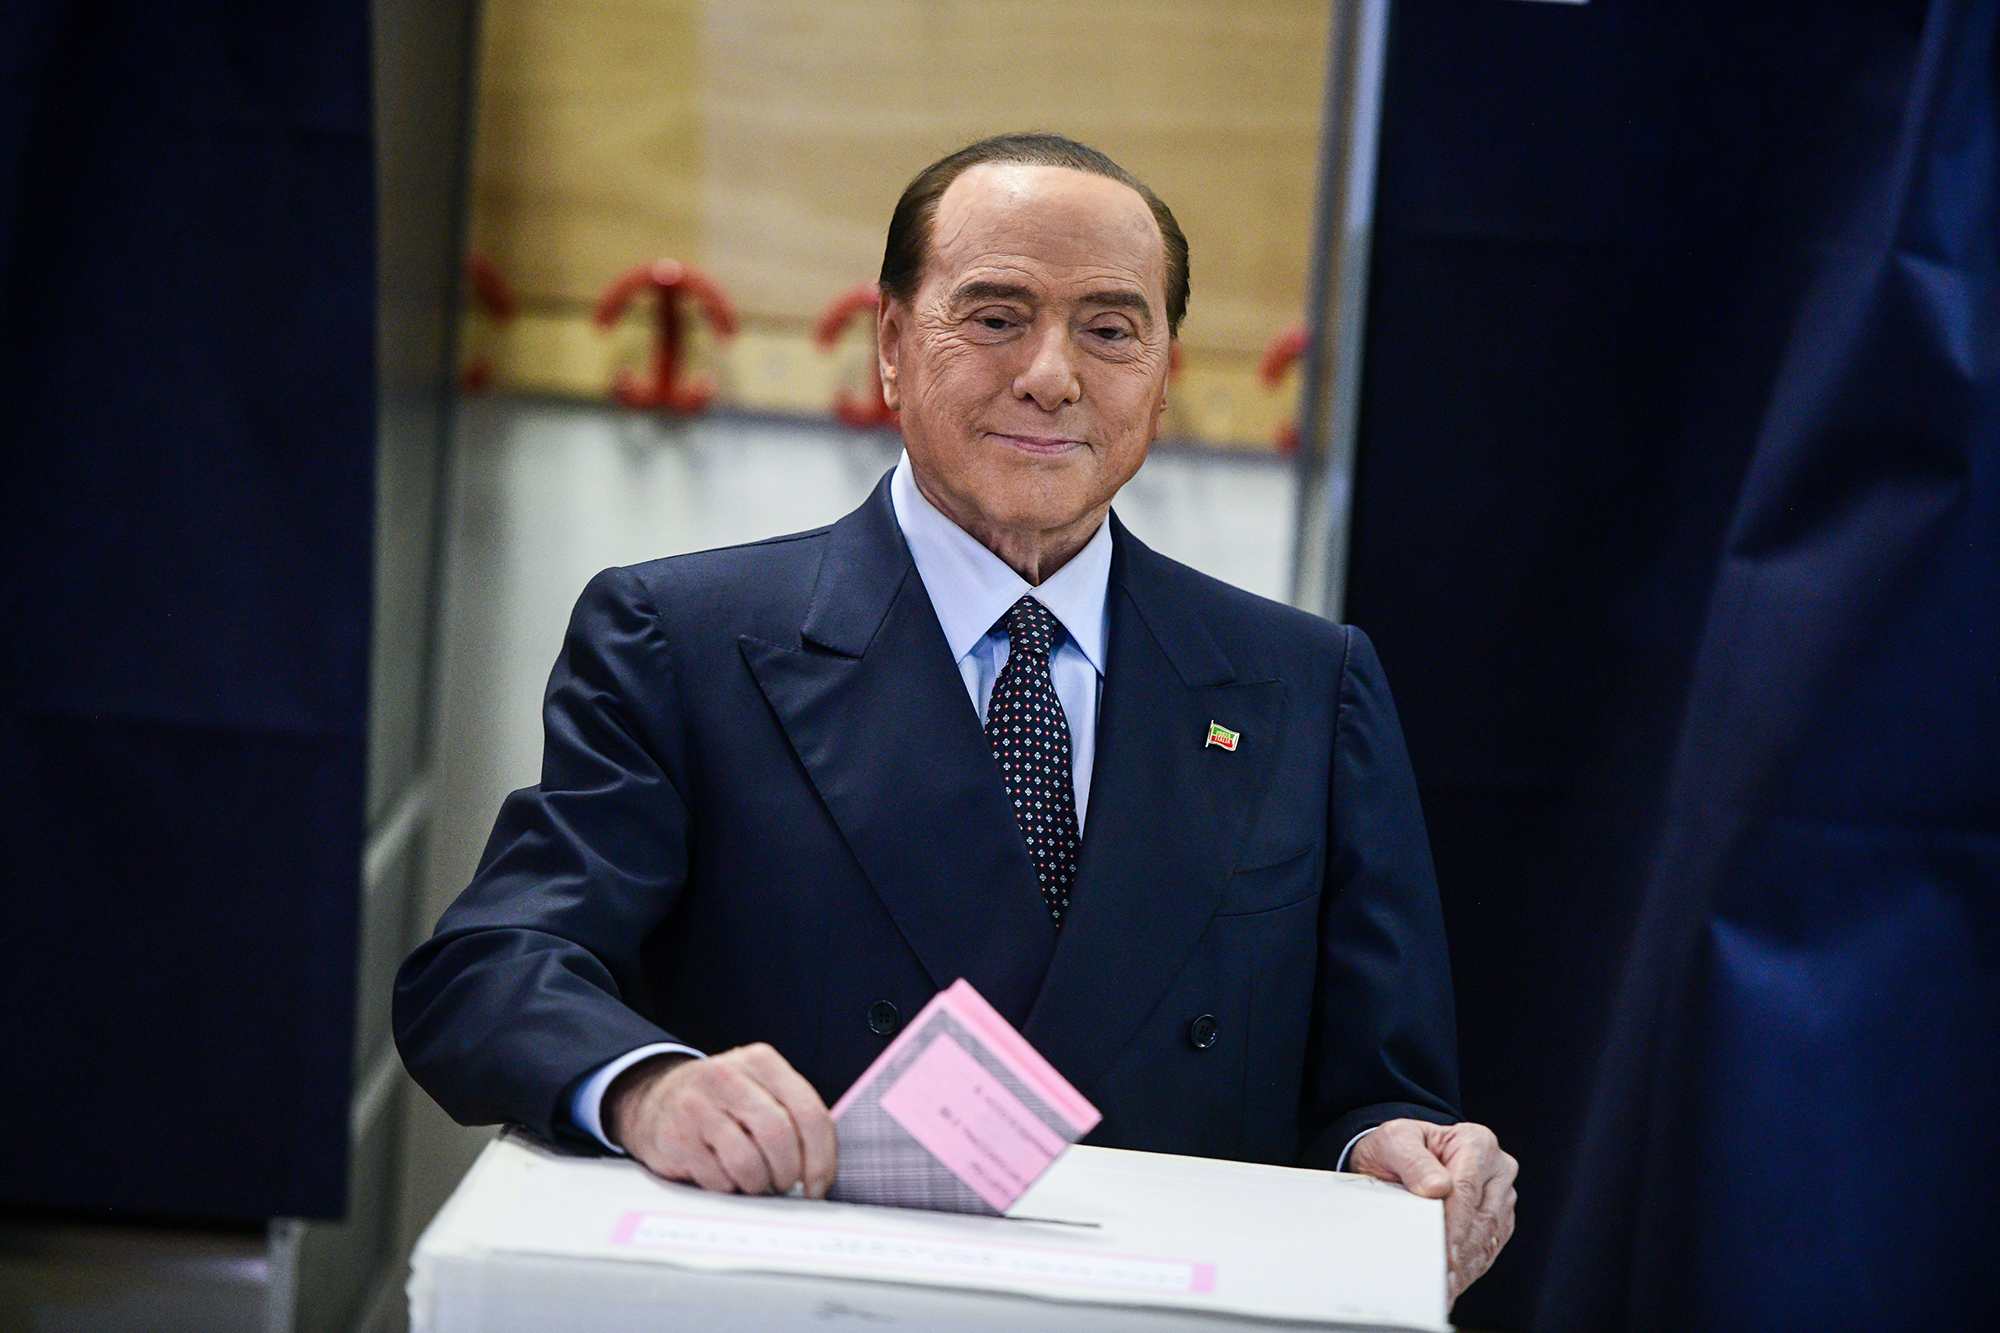 Silvio Berlusconi, leader of Forza Italia, casts his vote during the general elections in Milan, Italy, on September 25, 2022.